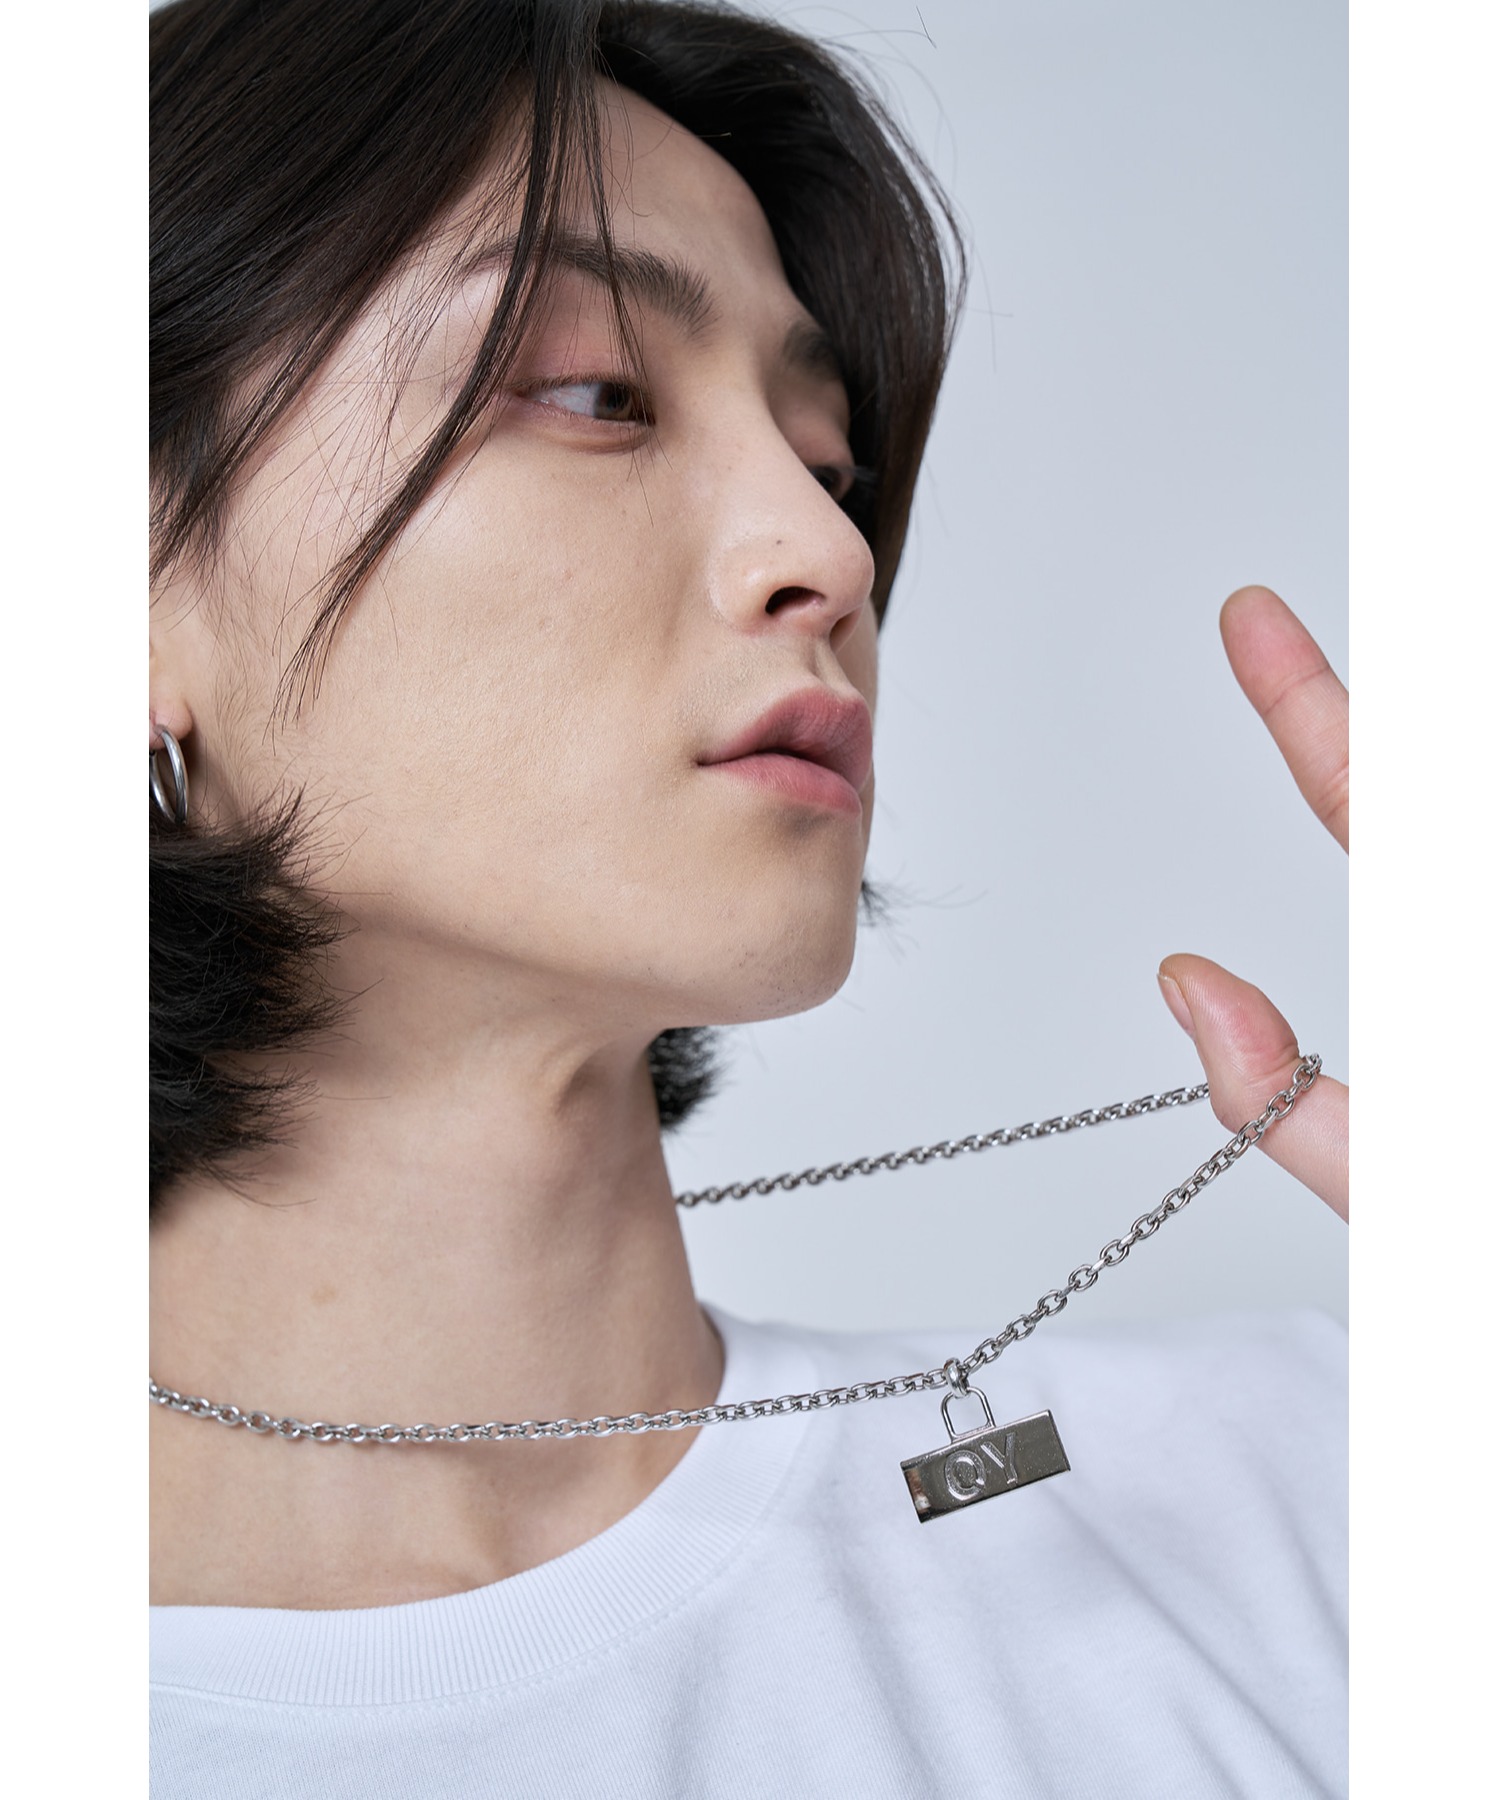 OY/オーワイ』SQUARE LOGO NECKLACE/スクウェアロゴネックレス OY│A 